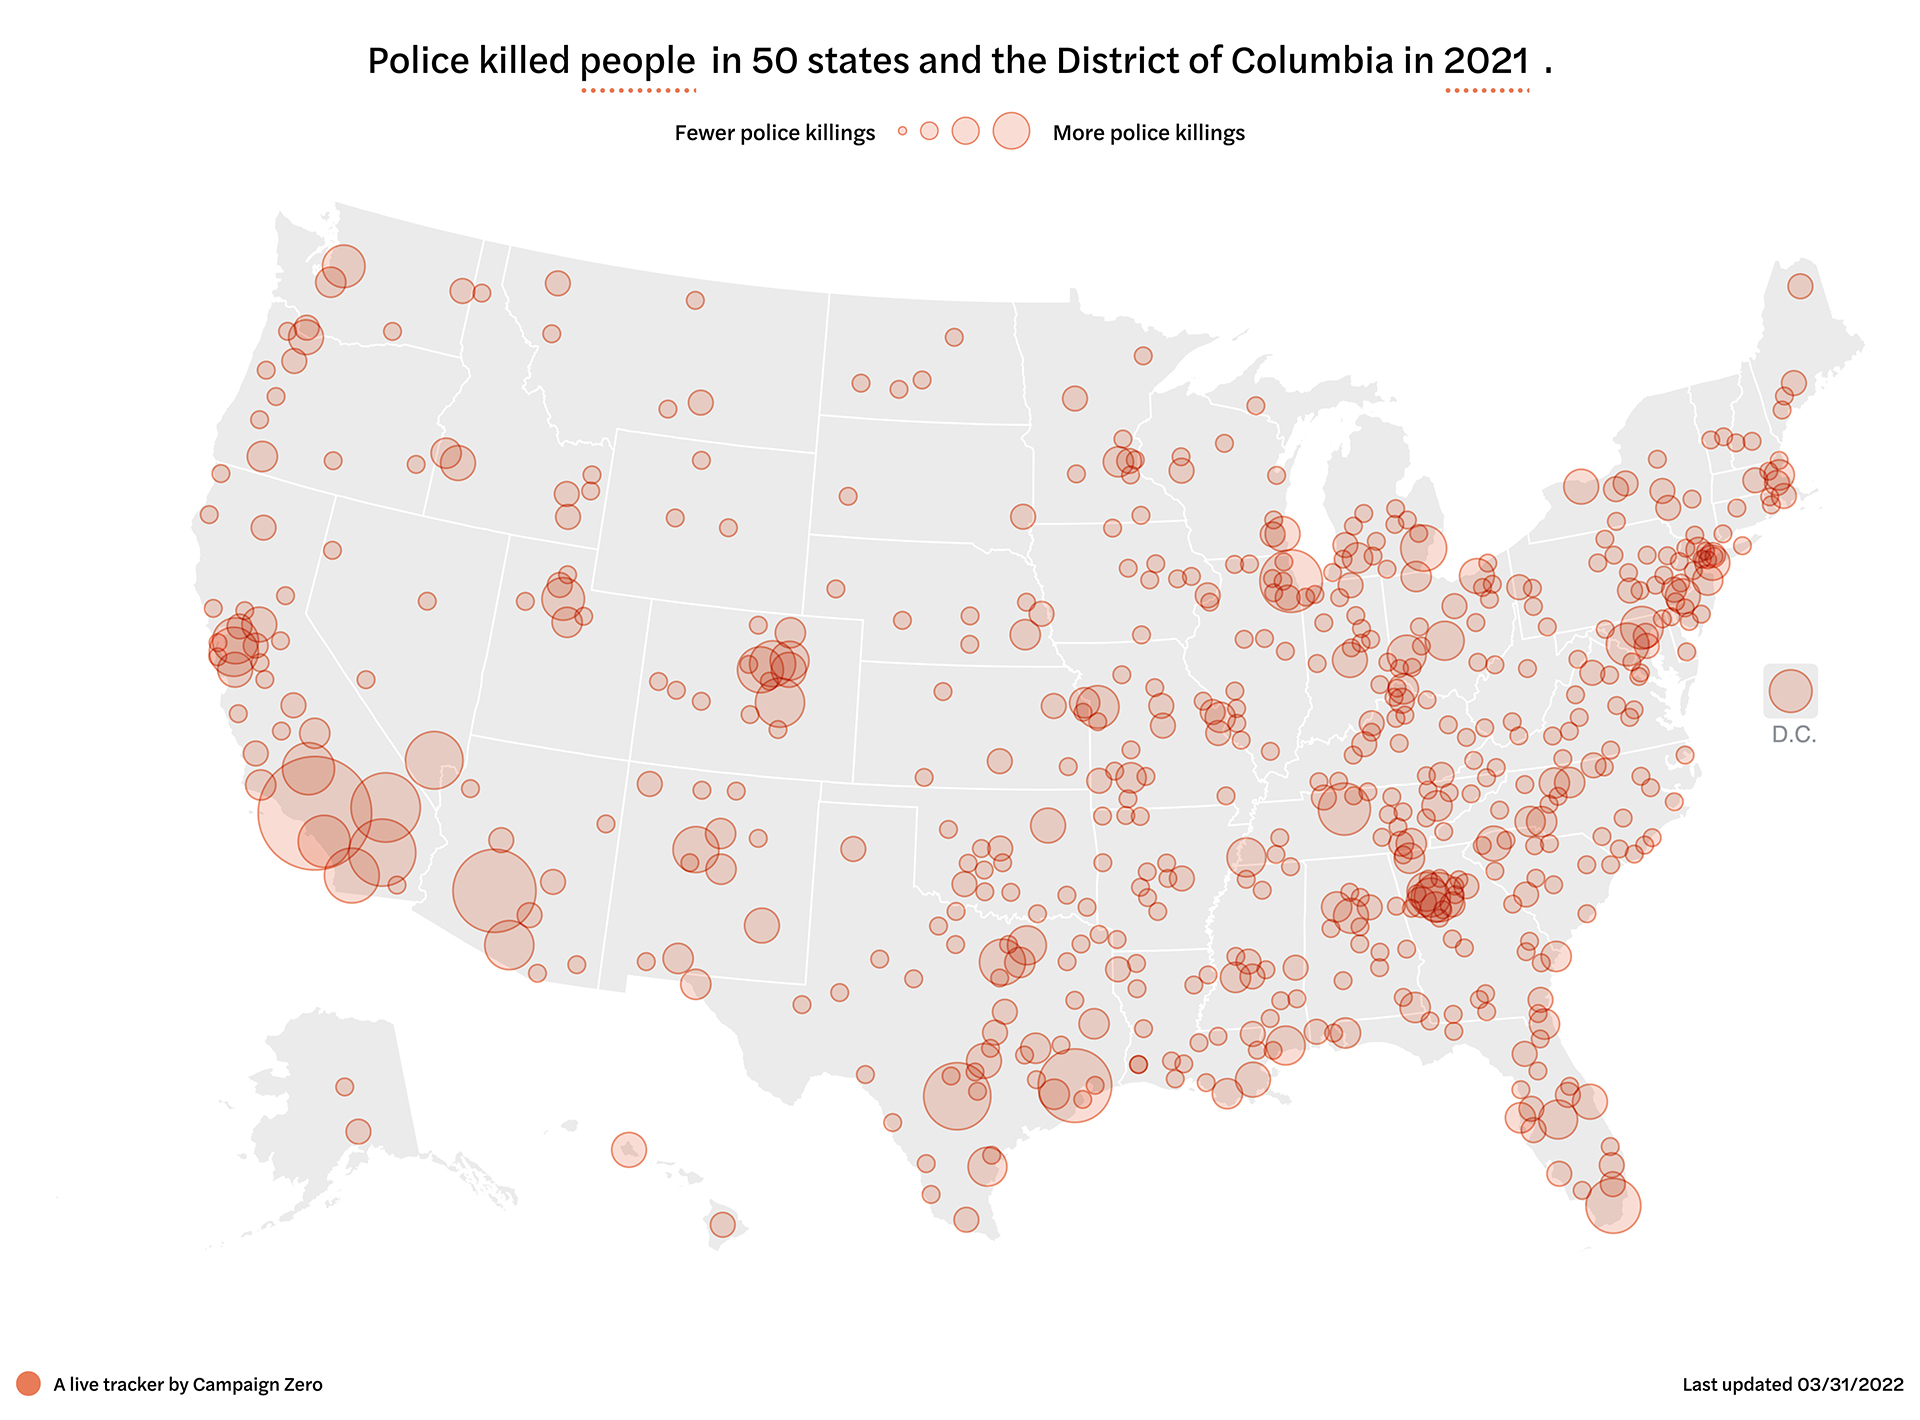 A map of the United States with the title "Police killed people in 50 states and the District of Columbia in 2021" shows circles of various sizes to illustrate scale placed at the sites of police shootings.